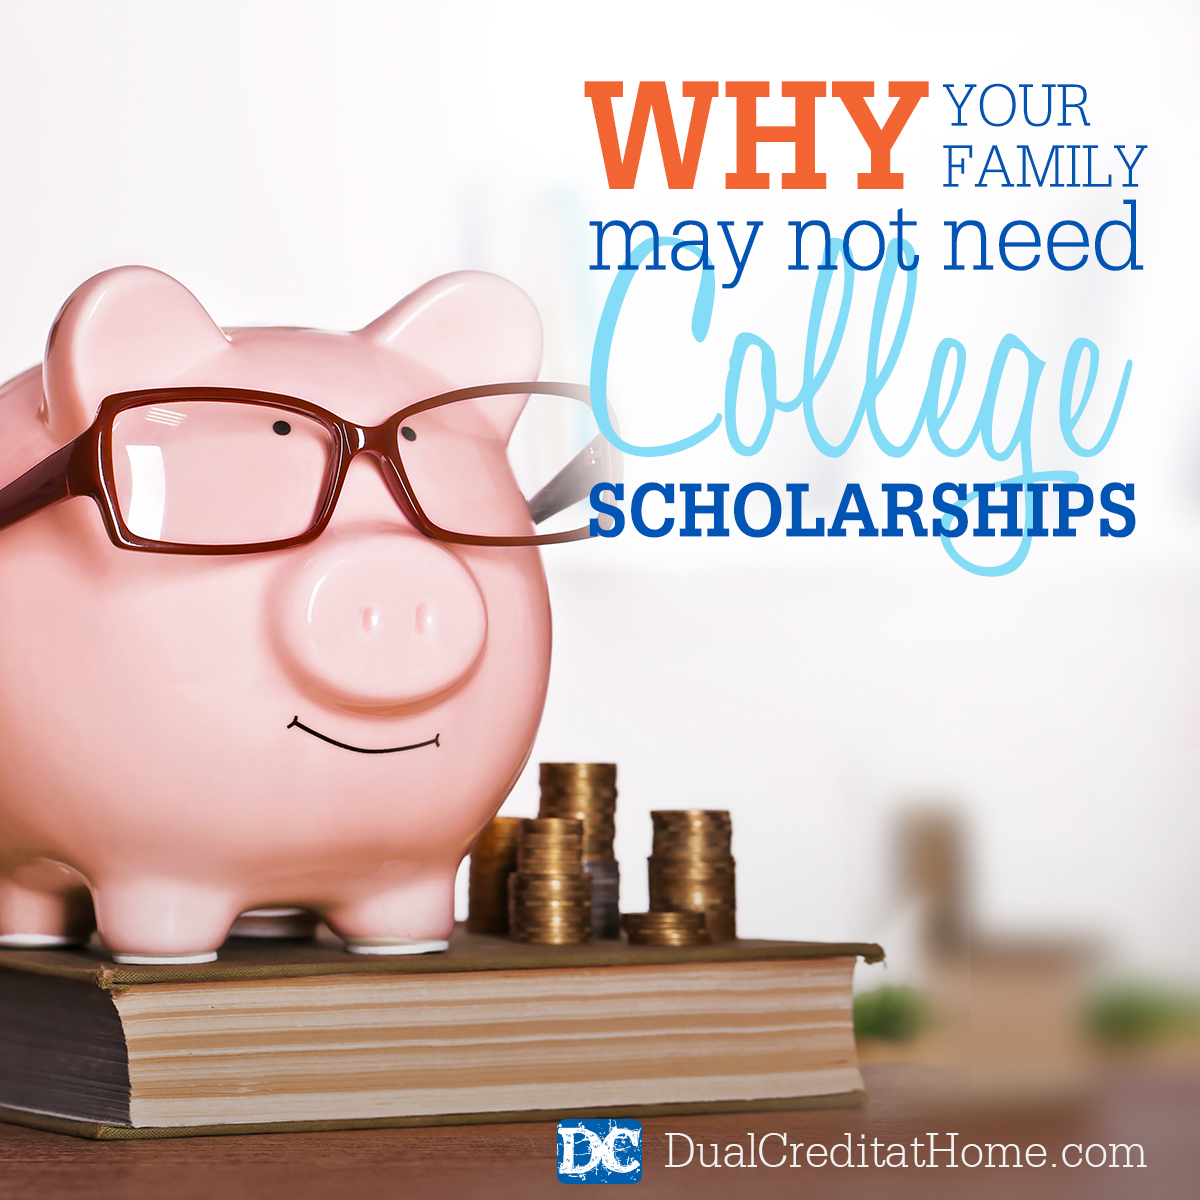 Why Your Family May Not Need College Scholarships